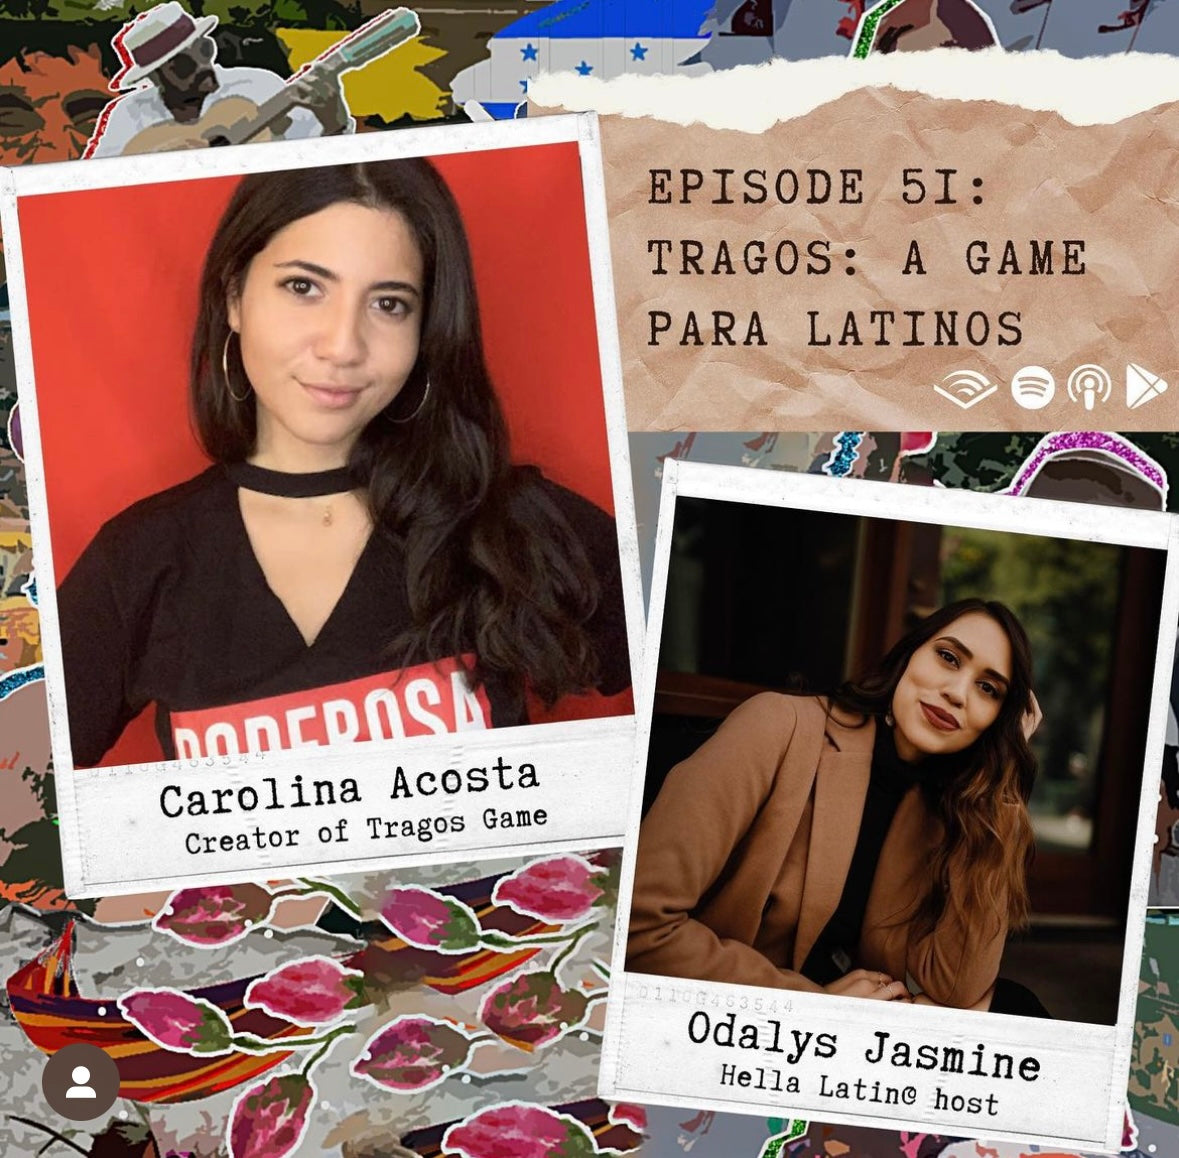 Carolina Acosta and Odalys Jasmine talk on Hella Latin@ about being Latinas in the U.S., business tips, and play Tragos together